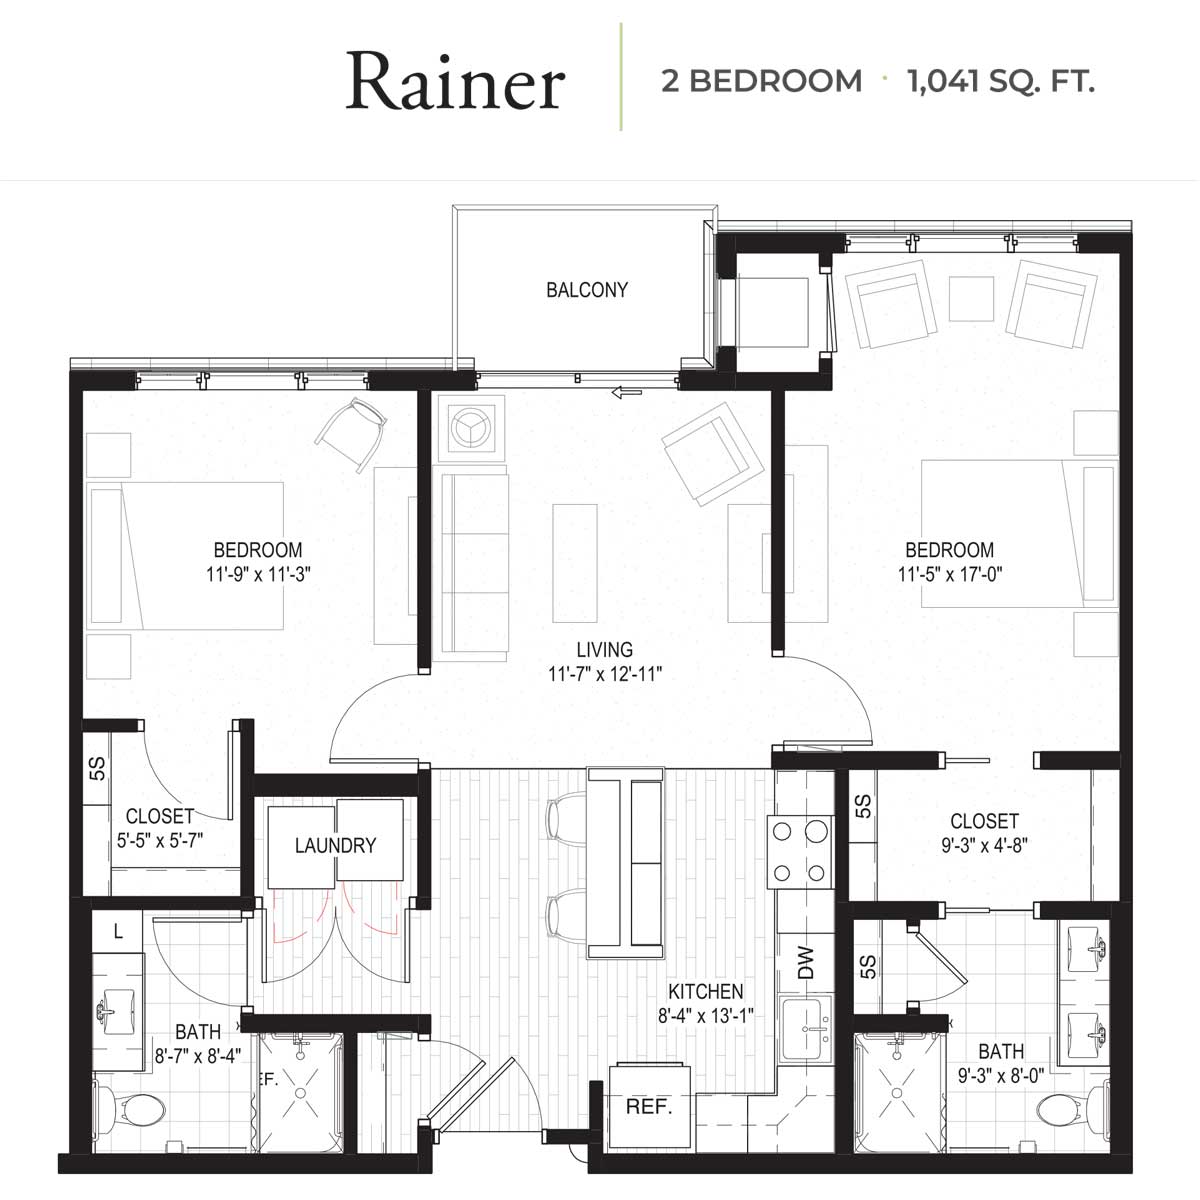 Floor plan of the Rainer model, a 2-bedroom apartment with 1,041 sq. ft., including balcony.